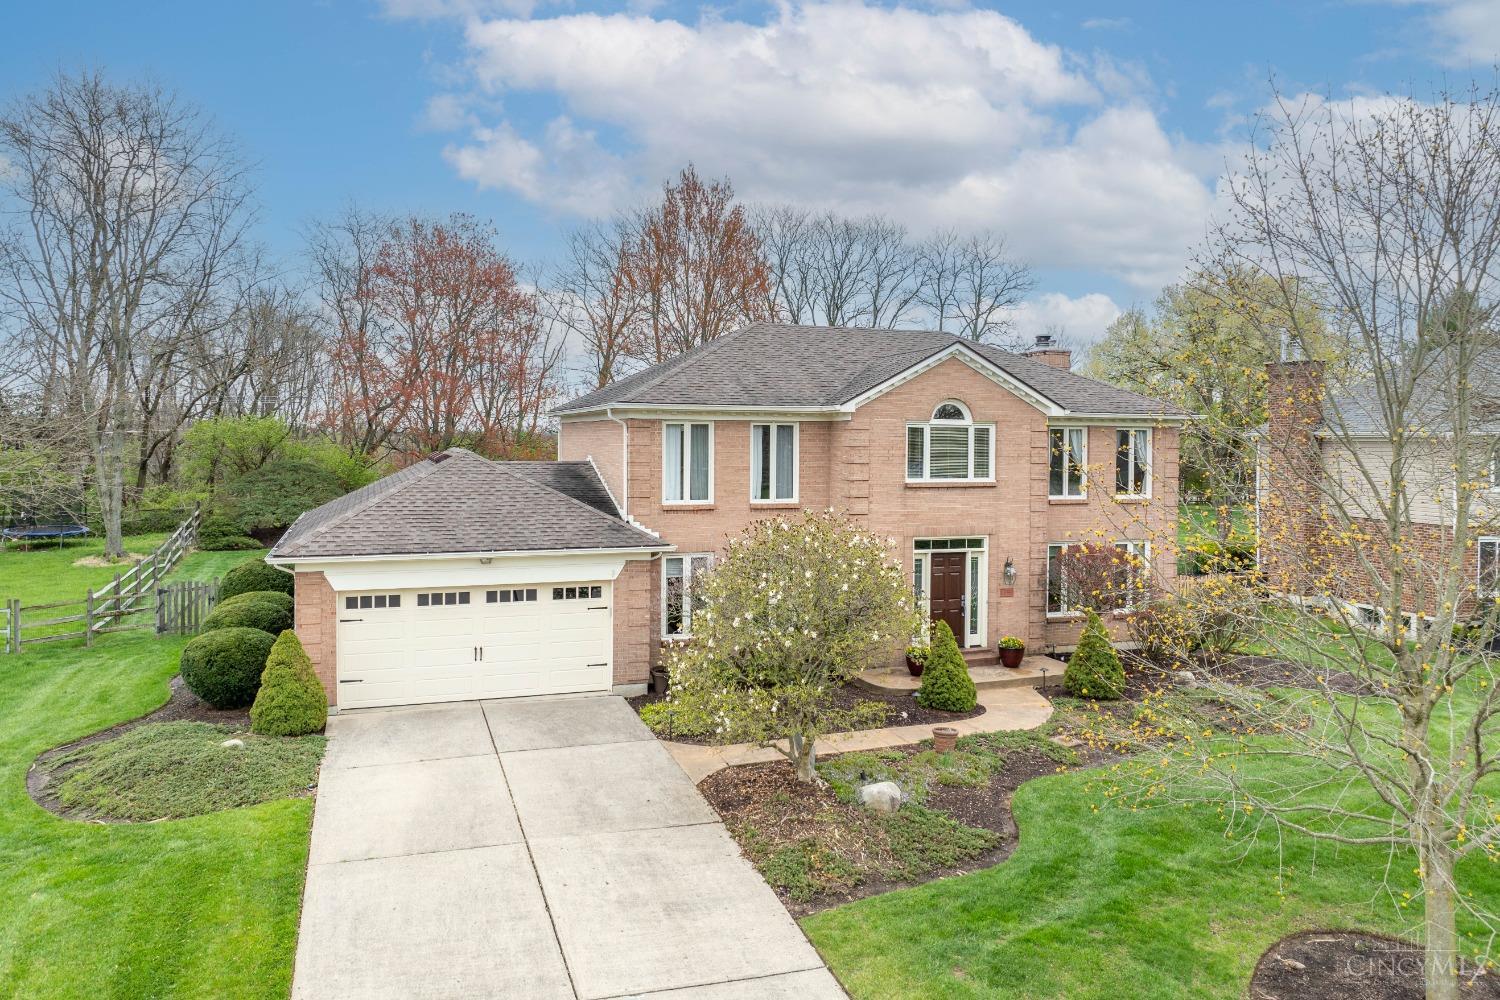 8535 Meadow Bluff Ct, Symmes Twp, OH 